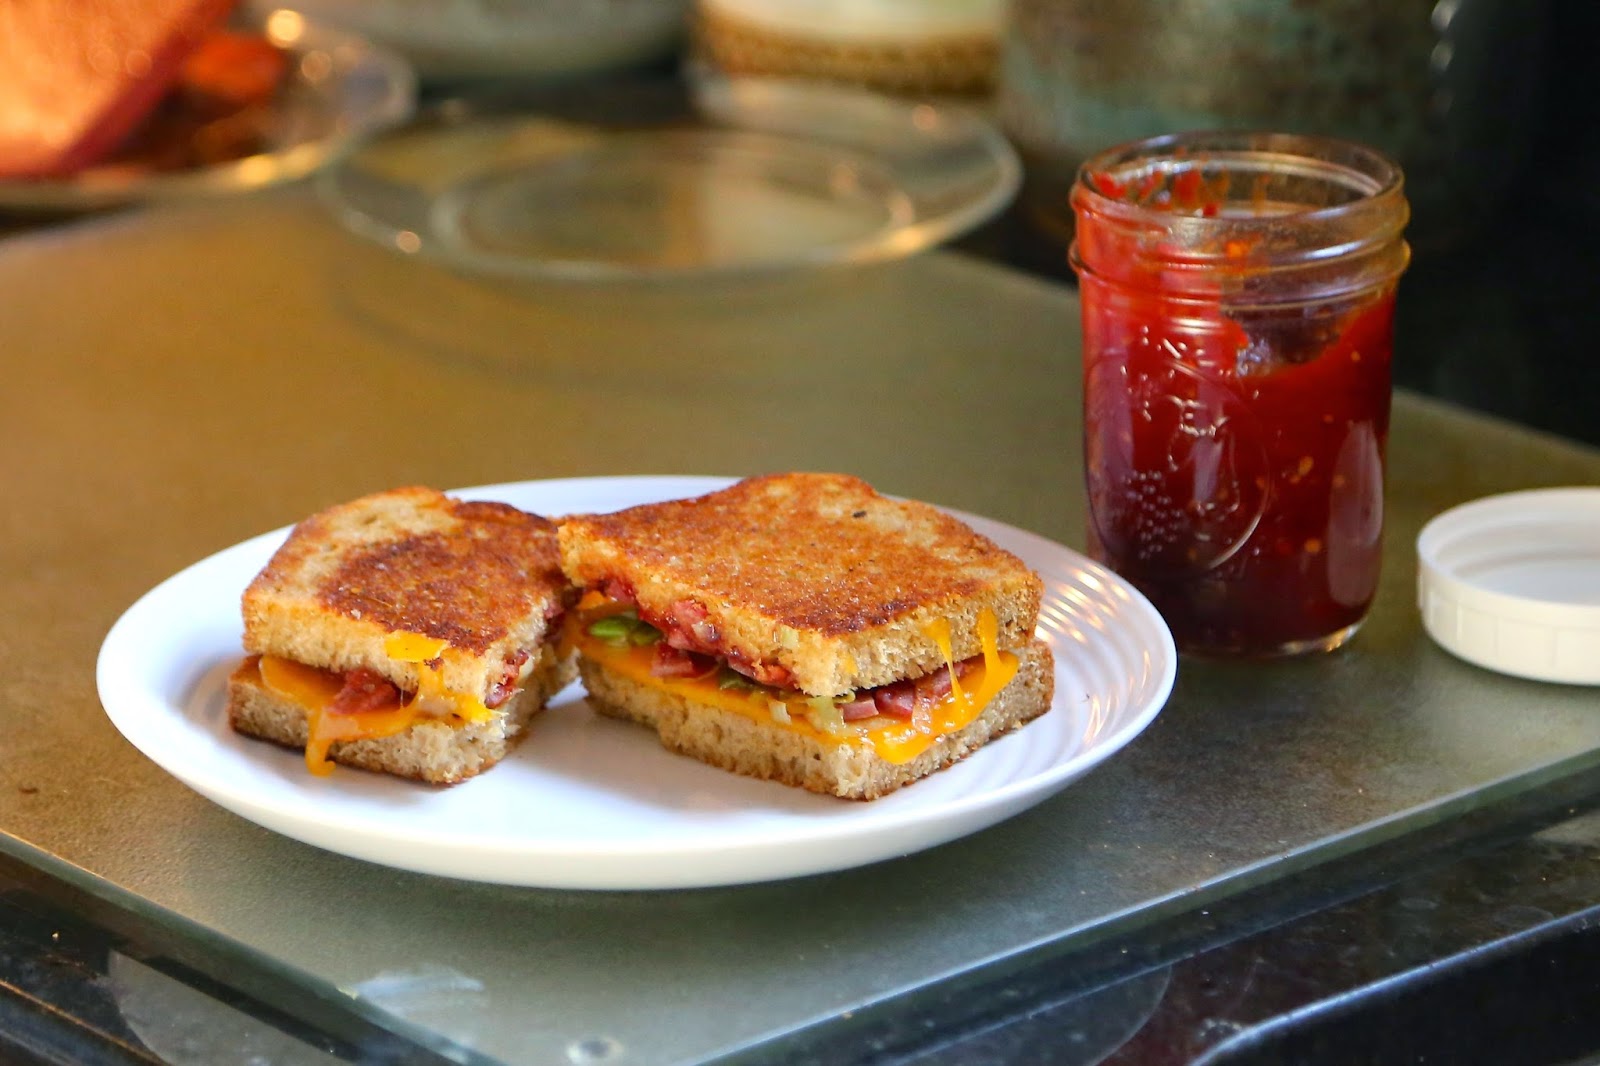 Sweet and salty, tangy and gooey, this grilled cheese sandwich with country ham, leeks, and tomato jam hits all the right notes.